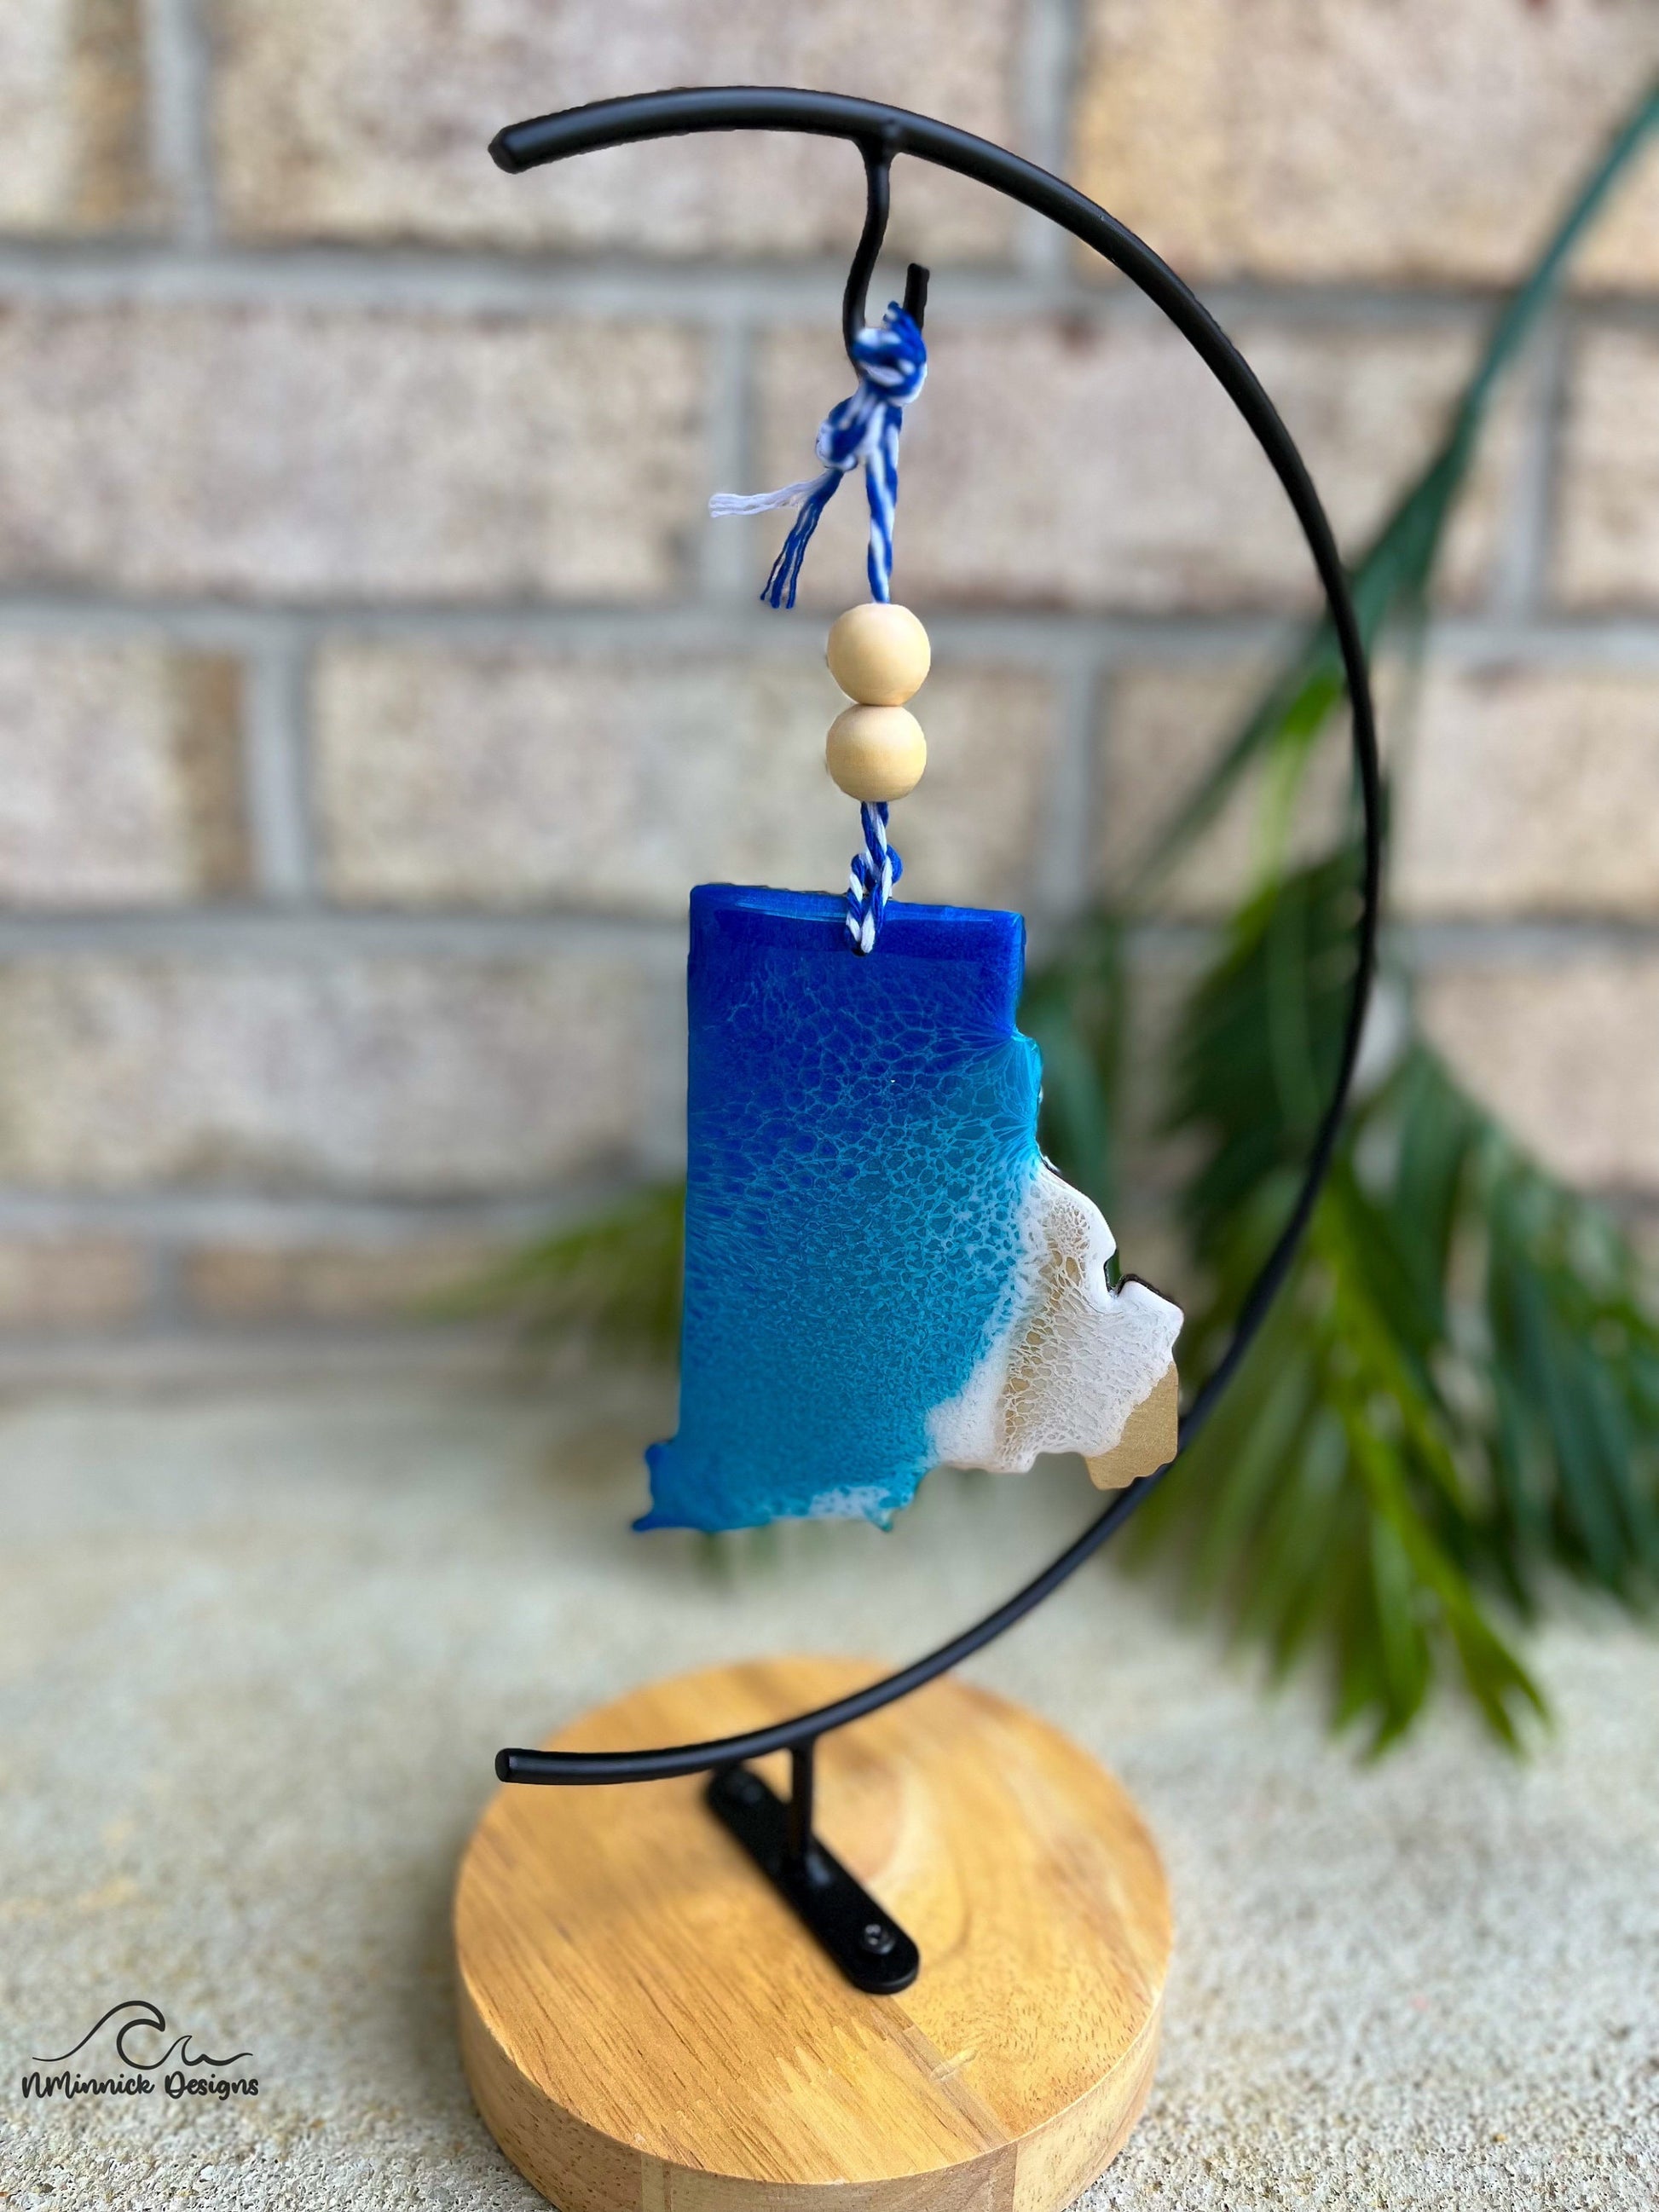 Rhode Island shaped ornament with ocean resin art hanging from an ornament stand.